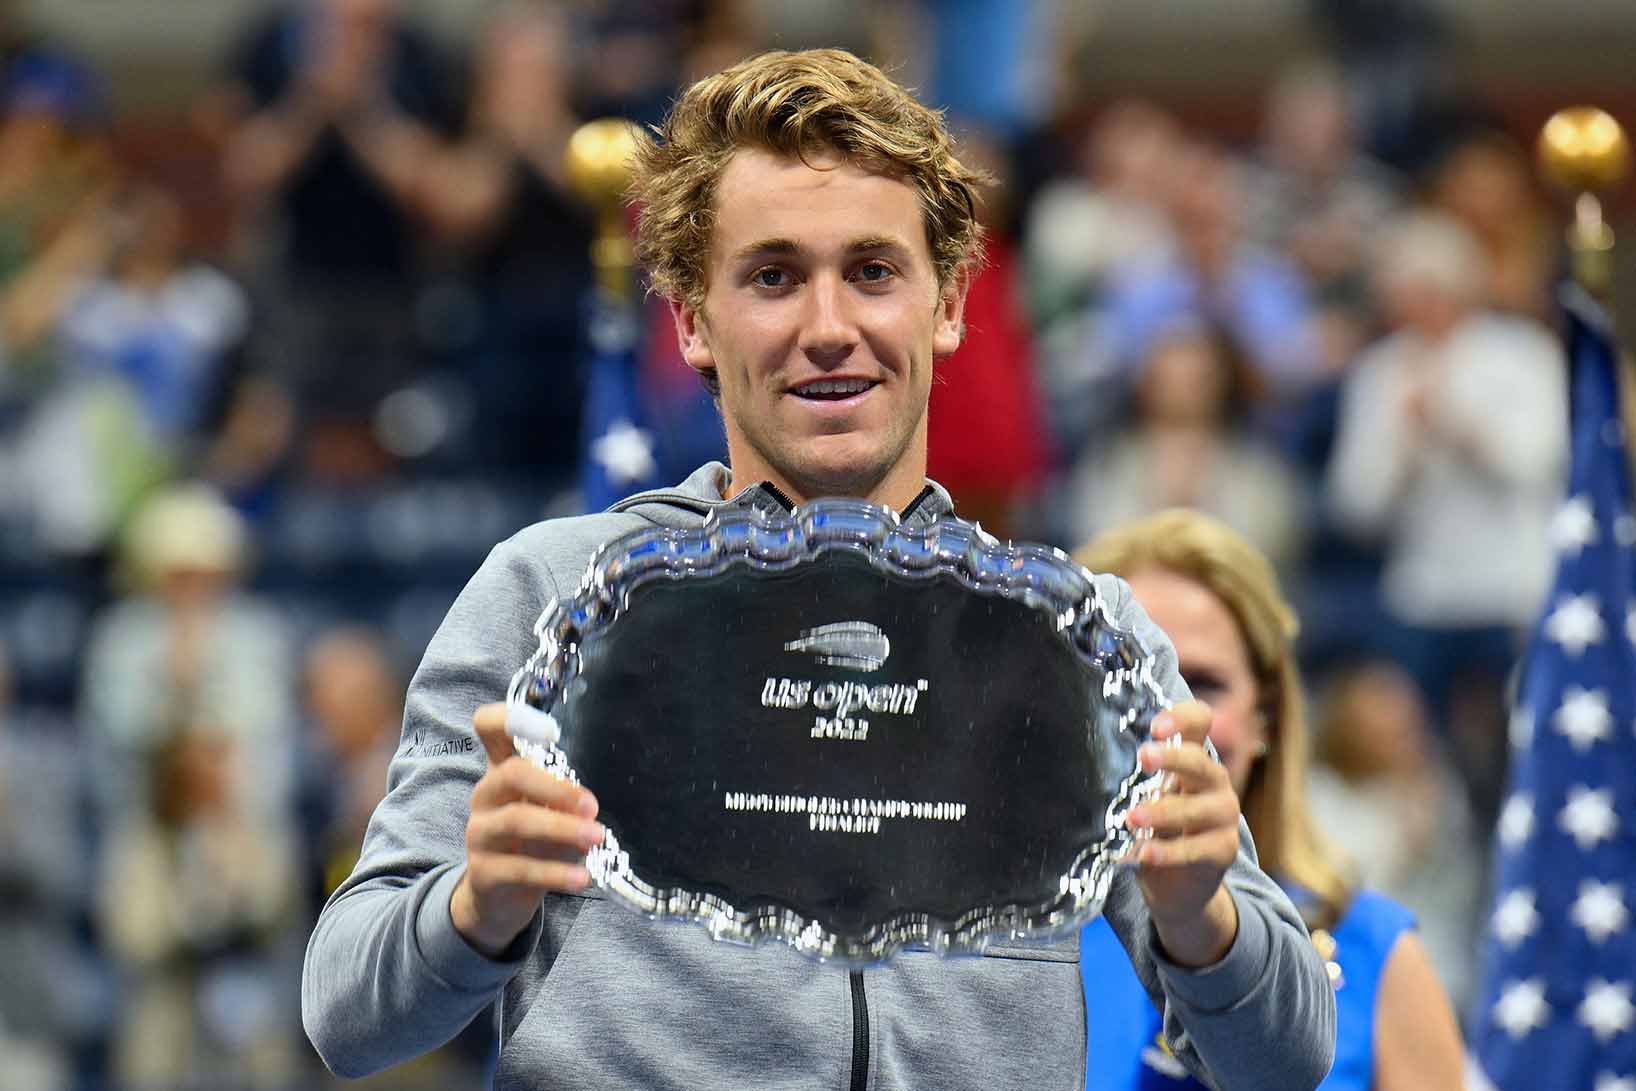 Casper Ruud climbs to number 2 in the ATP Ranking